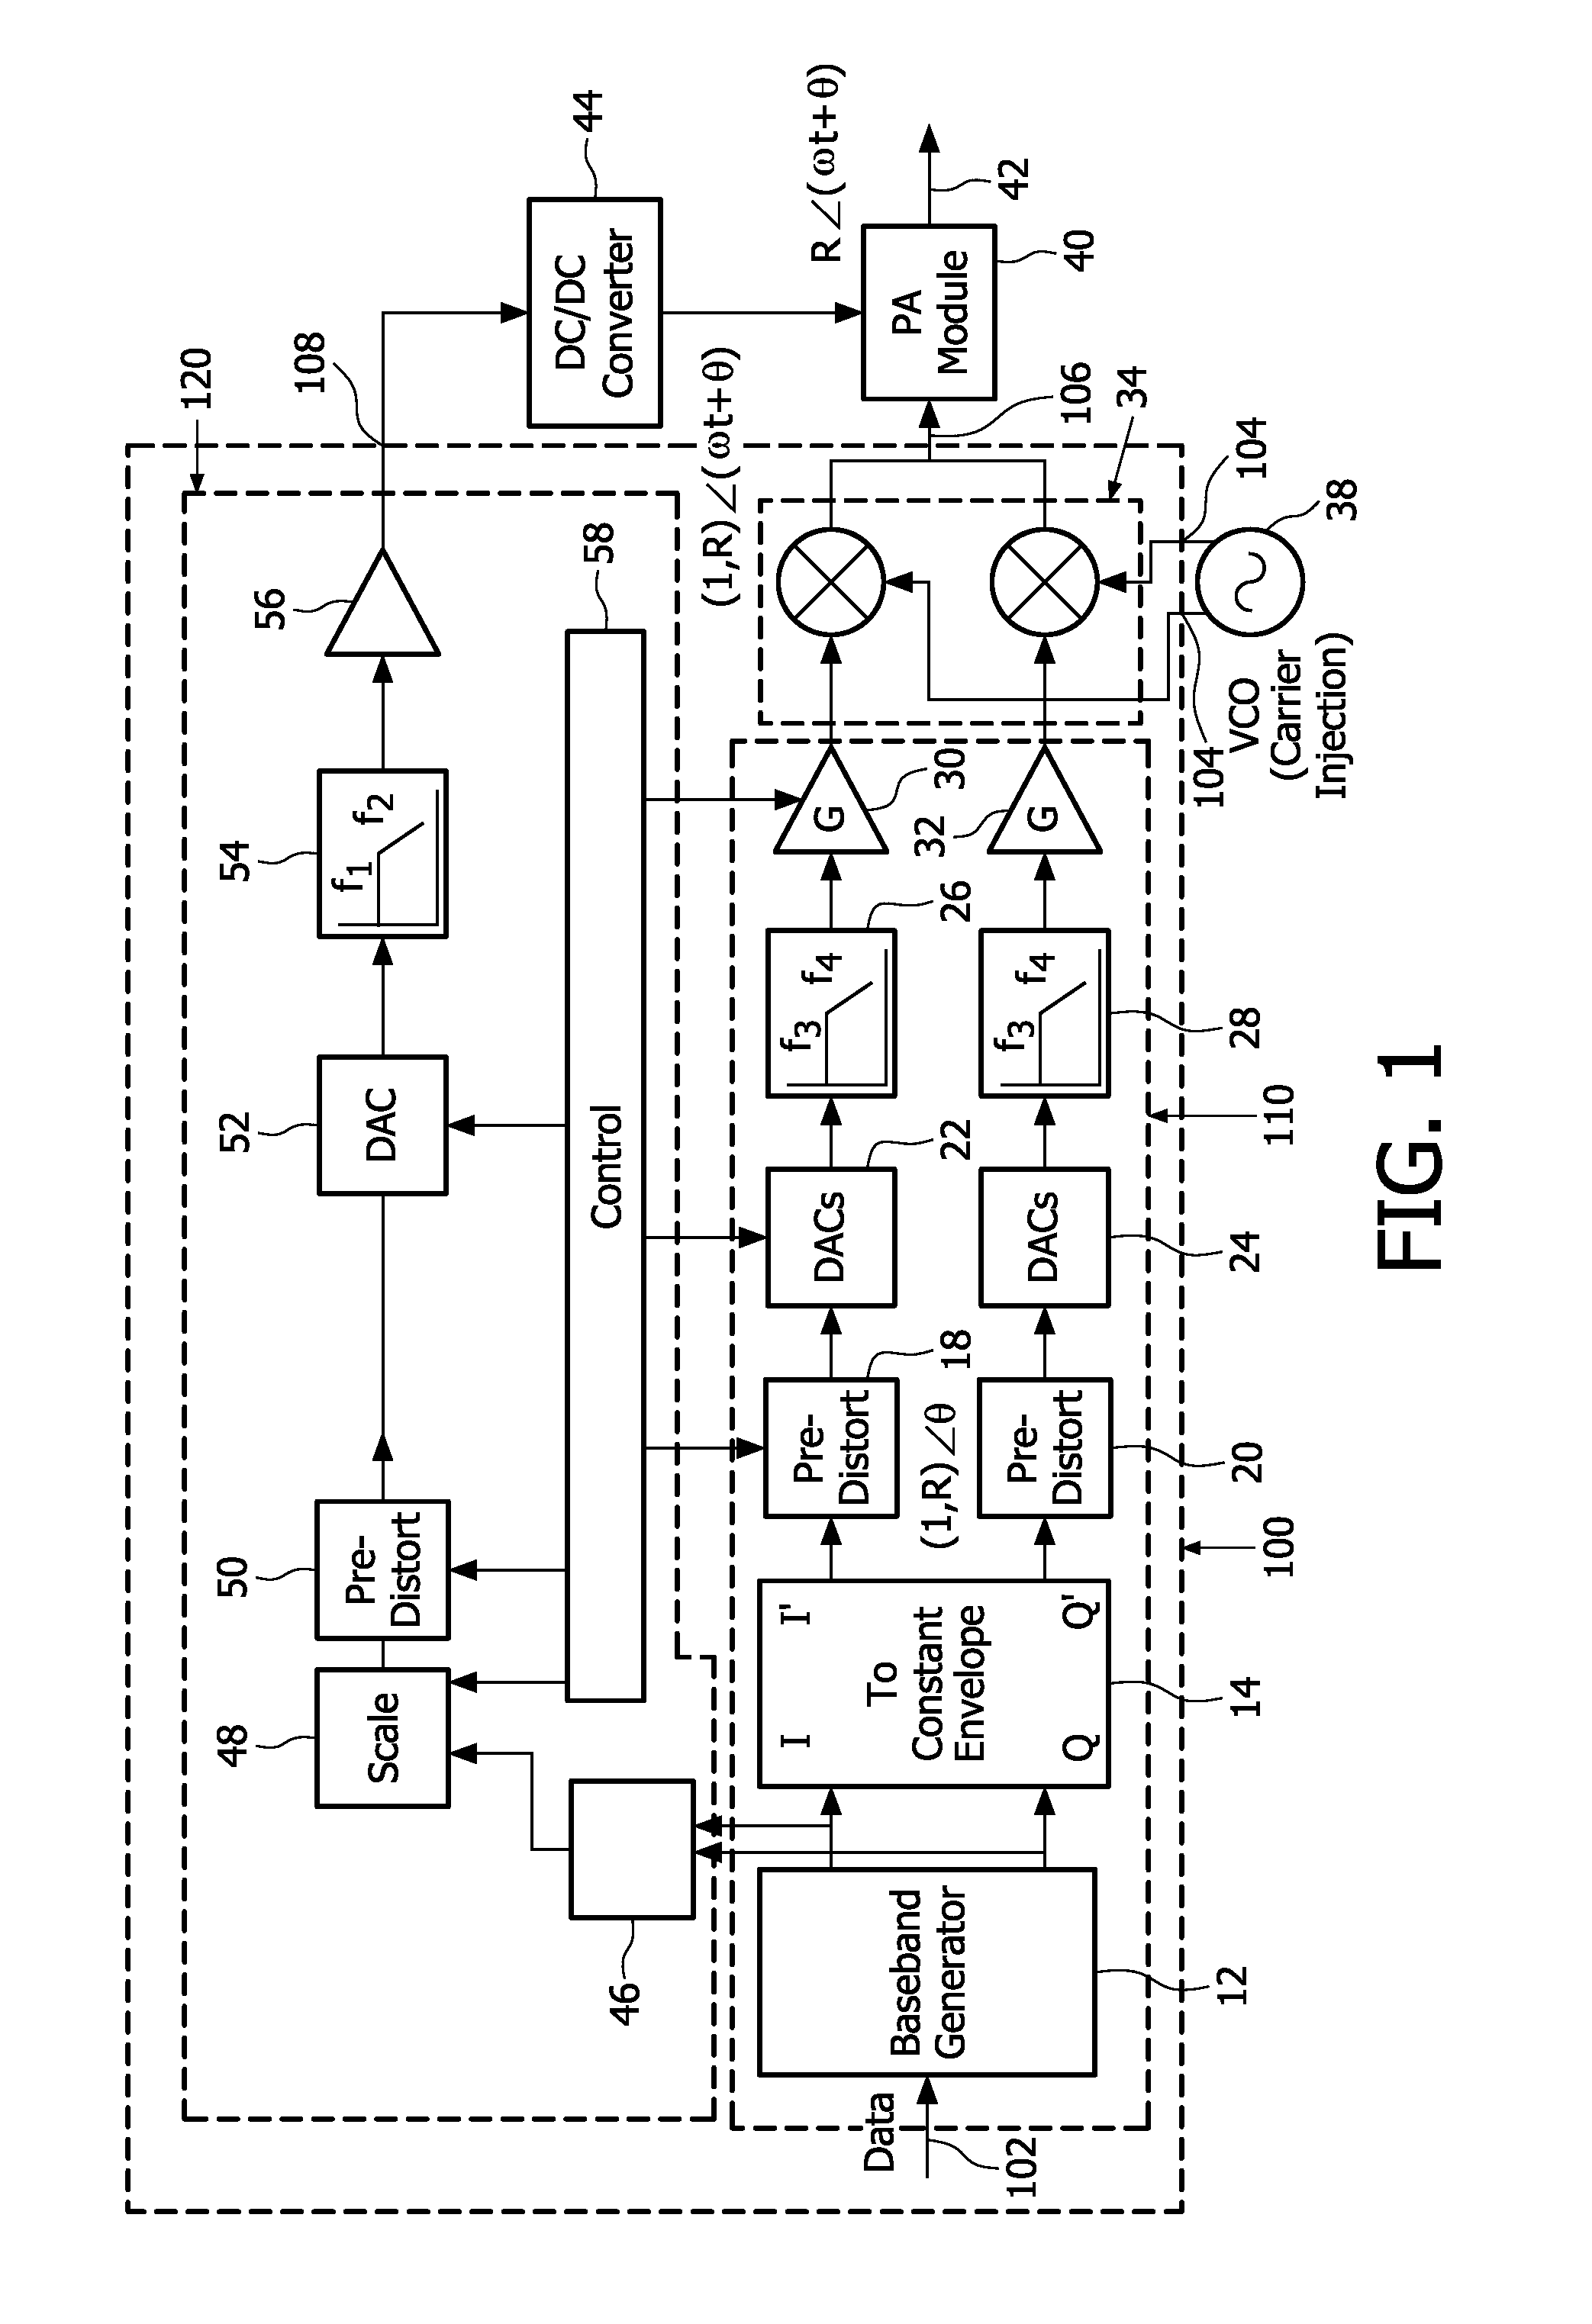 Multi-mode radio transmitters and a method of their operation